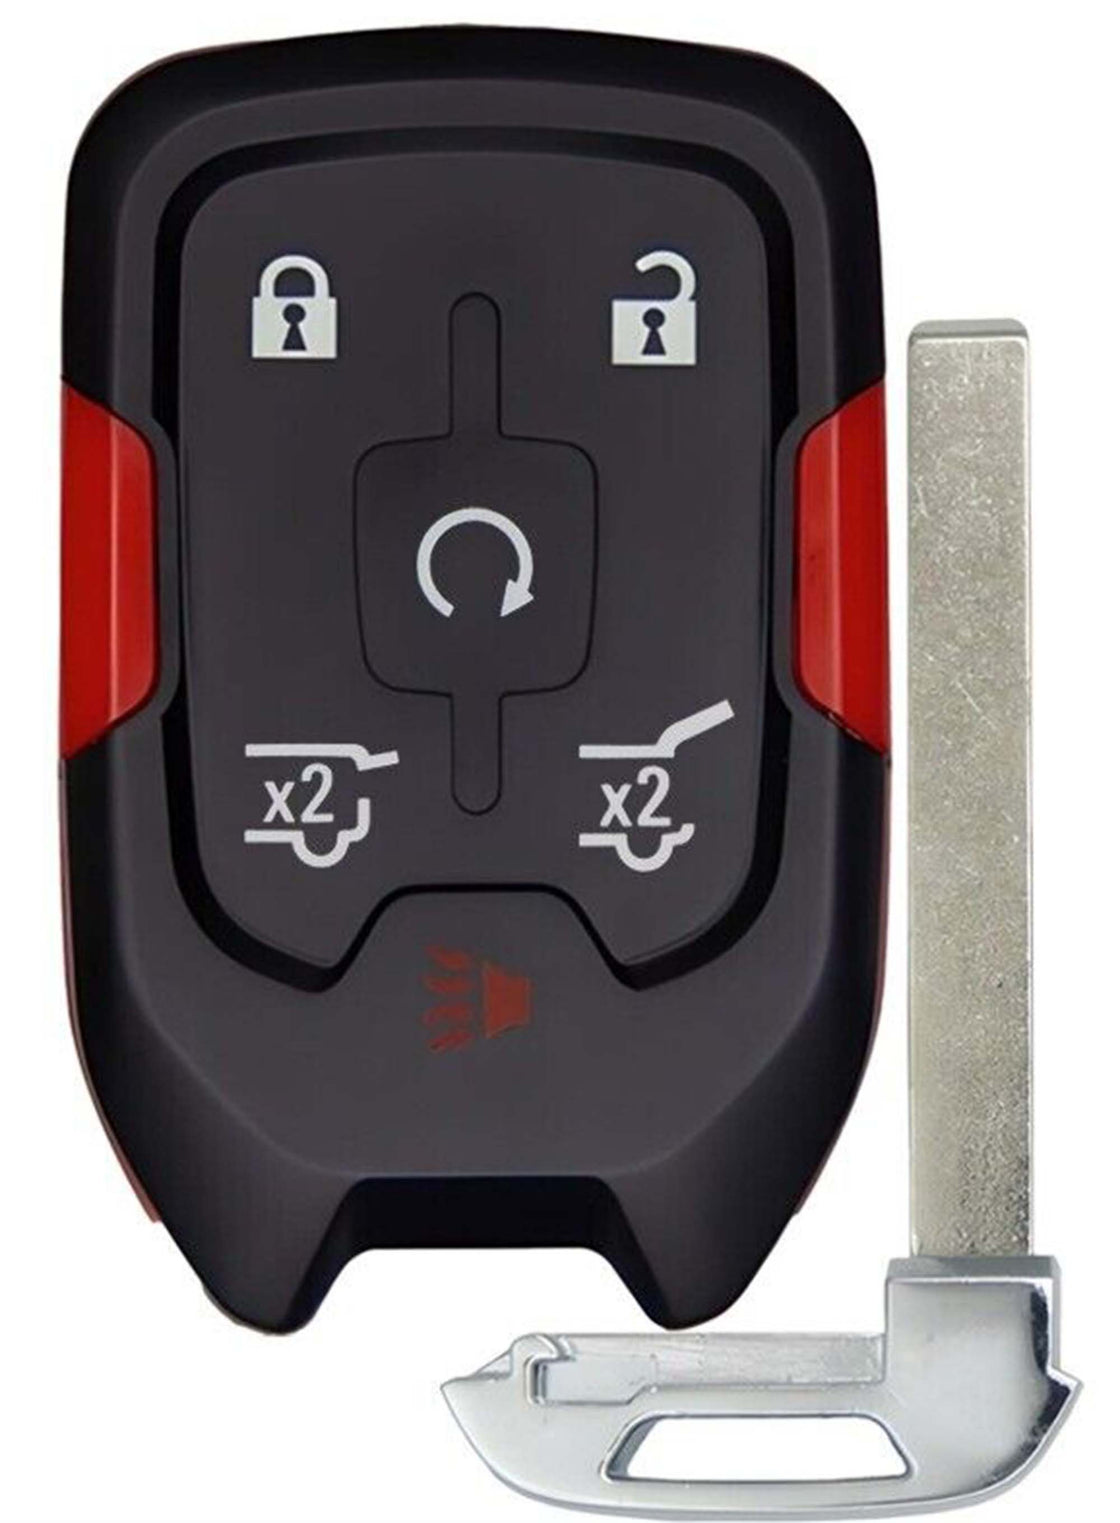 1x New Replacement Proximity Key Fob Compatible with & fit for Select Chevy Vehicles HYQ1EA - 433 MHz - HYQ1EA-P-RED-02